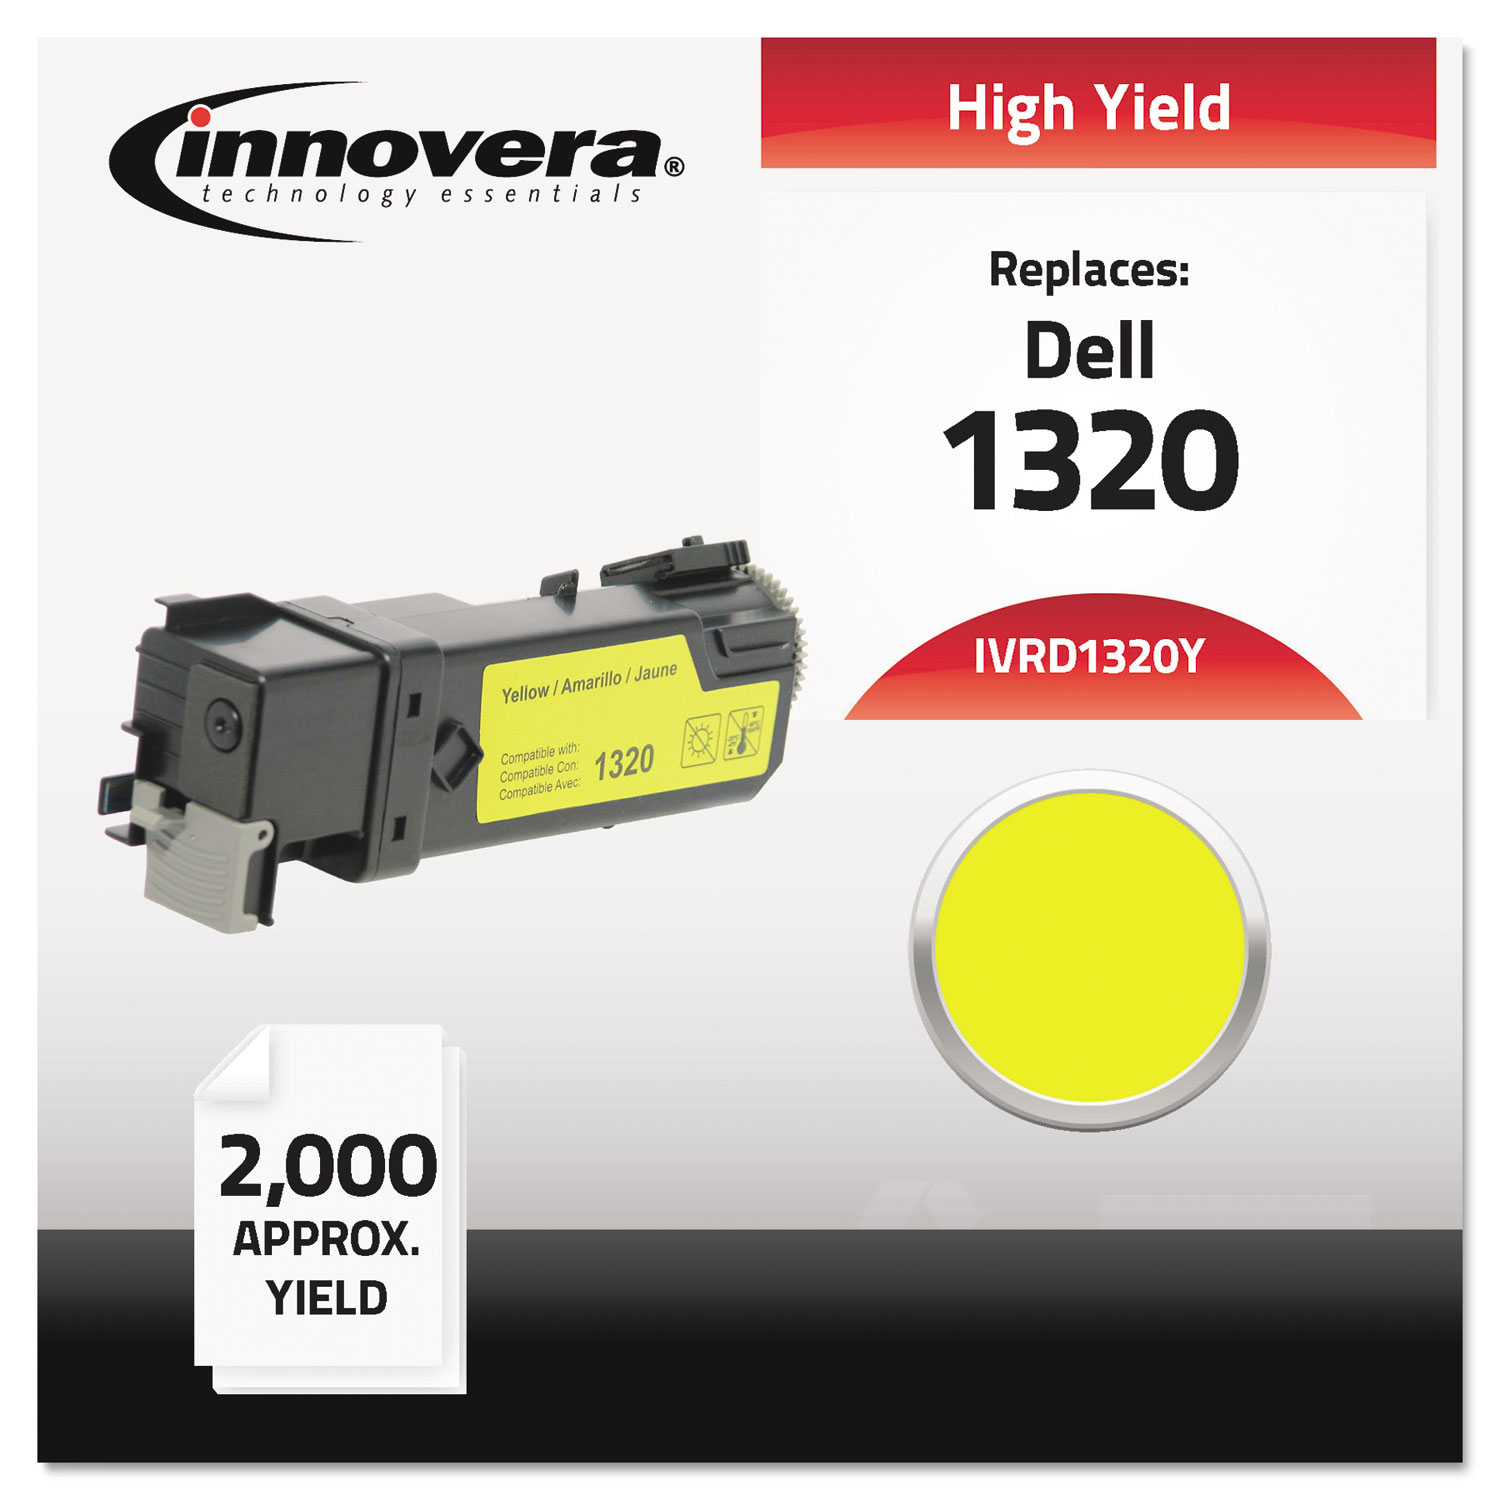 Remanufactured 310-9062 (1320) High-Yield Toner, 2000 Page-Yield, Yellow